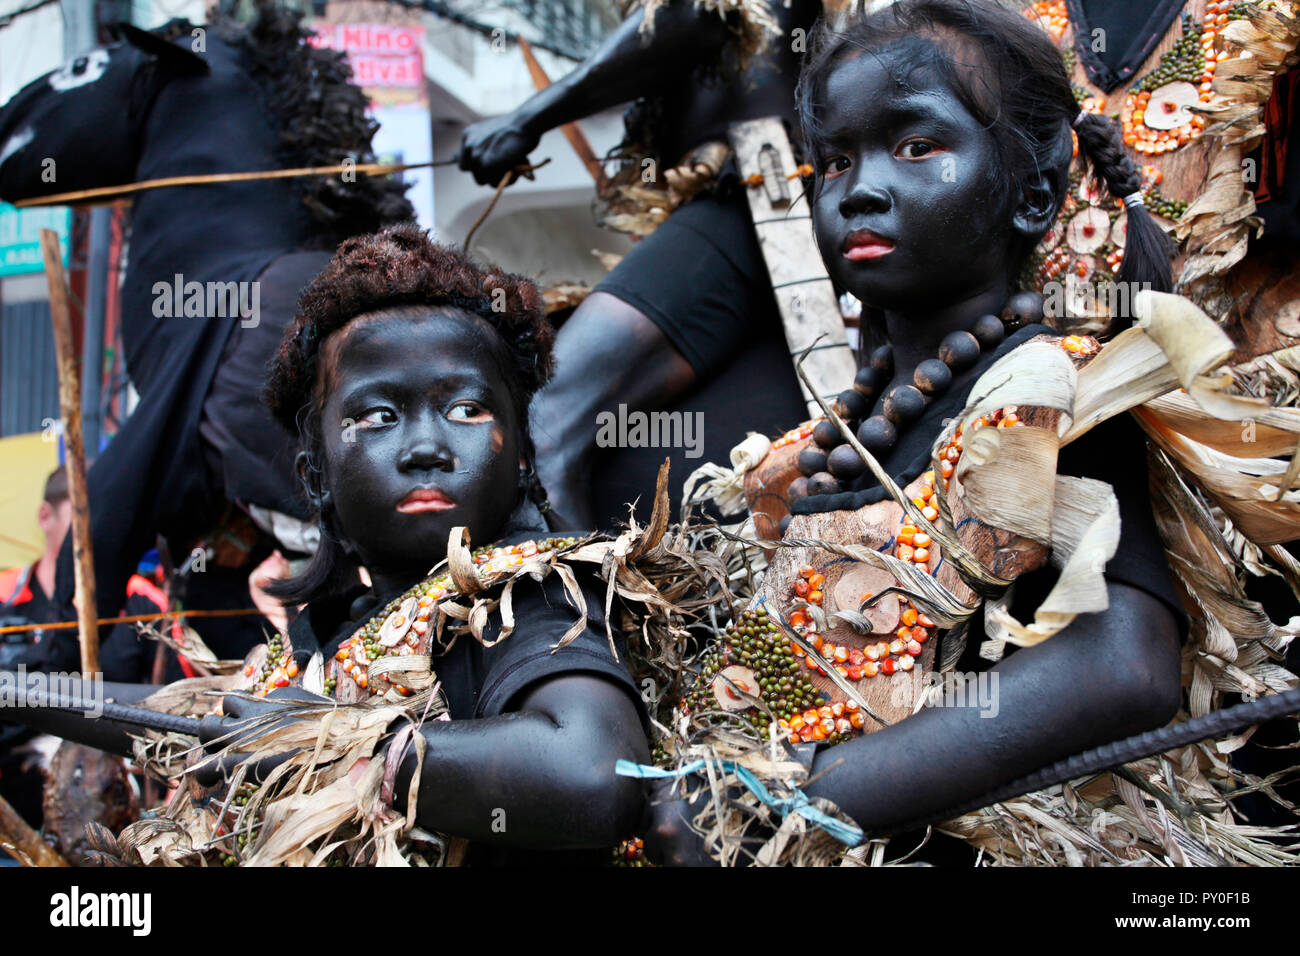 Children with black smeared faces in tribal costumes in front of horseback riding man at Ati Atihan festival, Kalibo, Aklan, Panay Island, Philippines Stock Photo